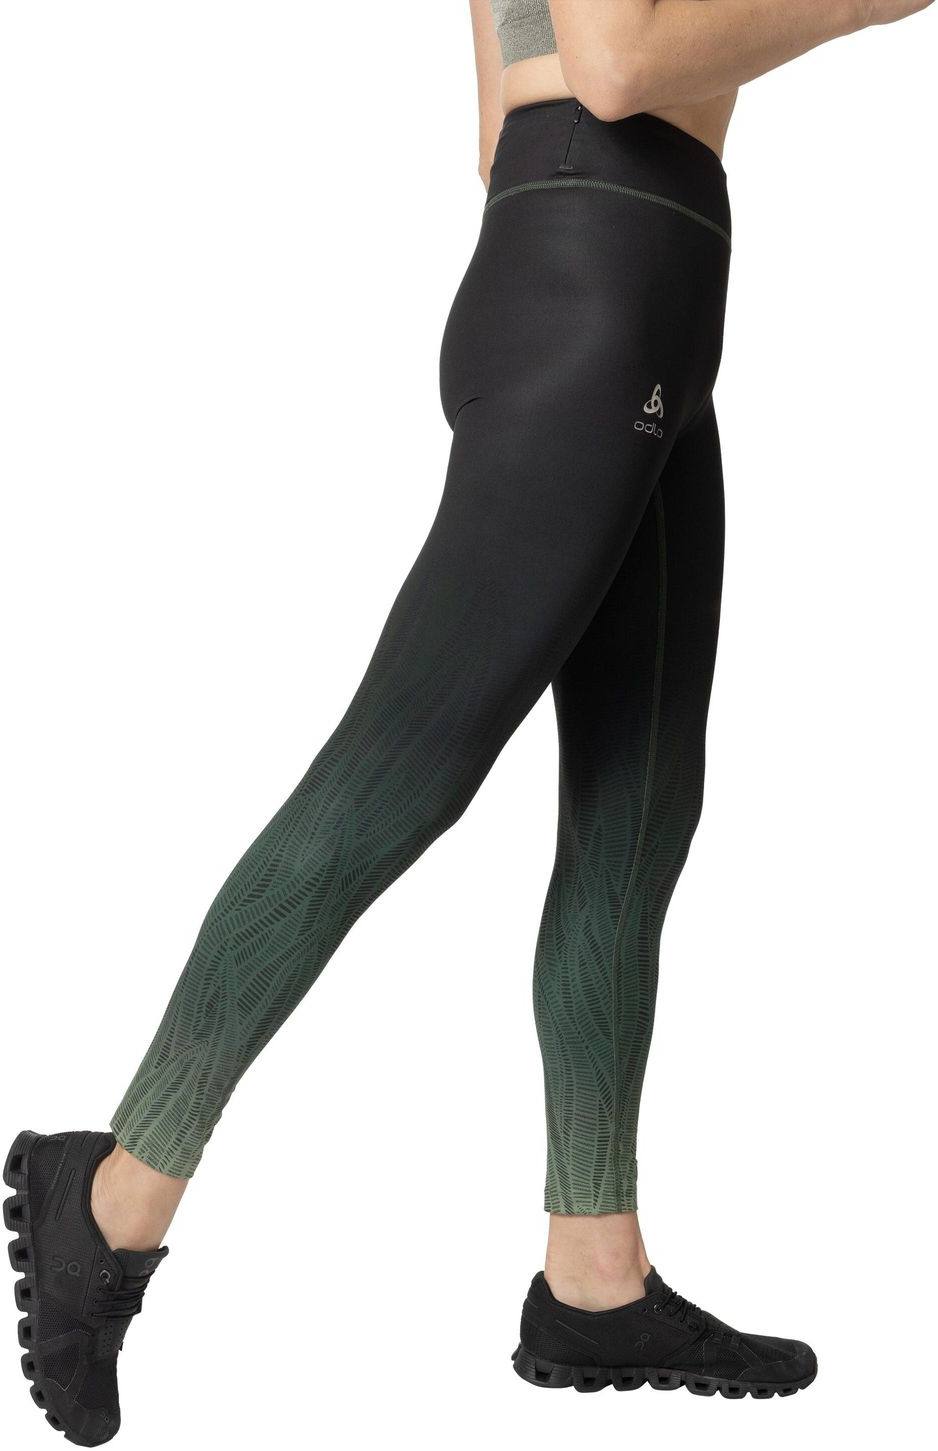 Image of Odlo Women's Zeroweight Print Tights